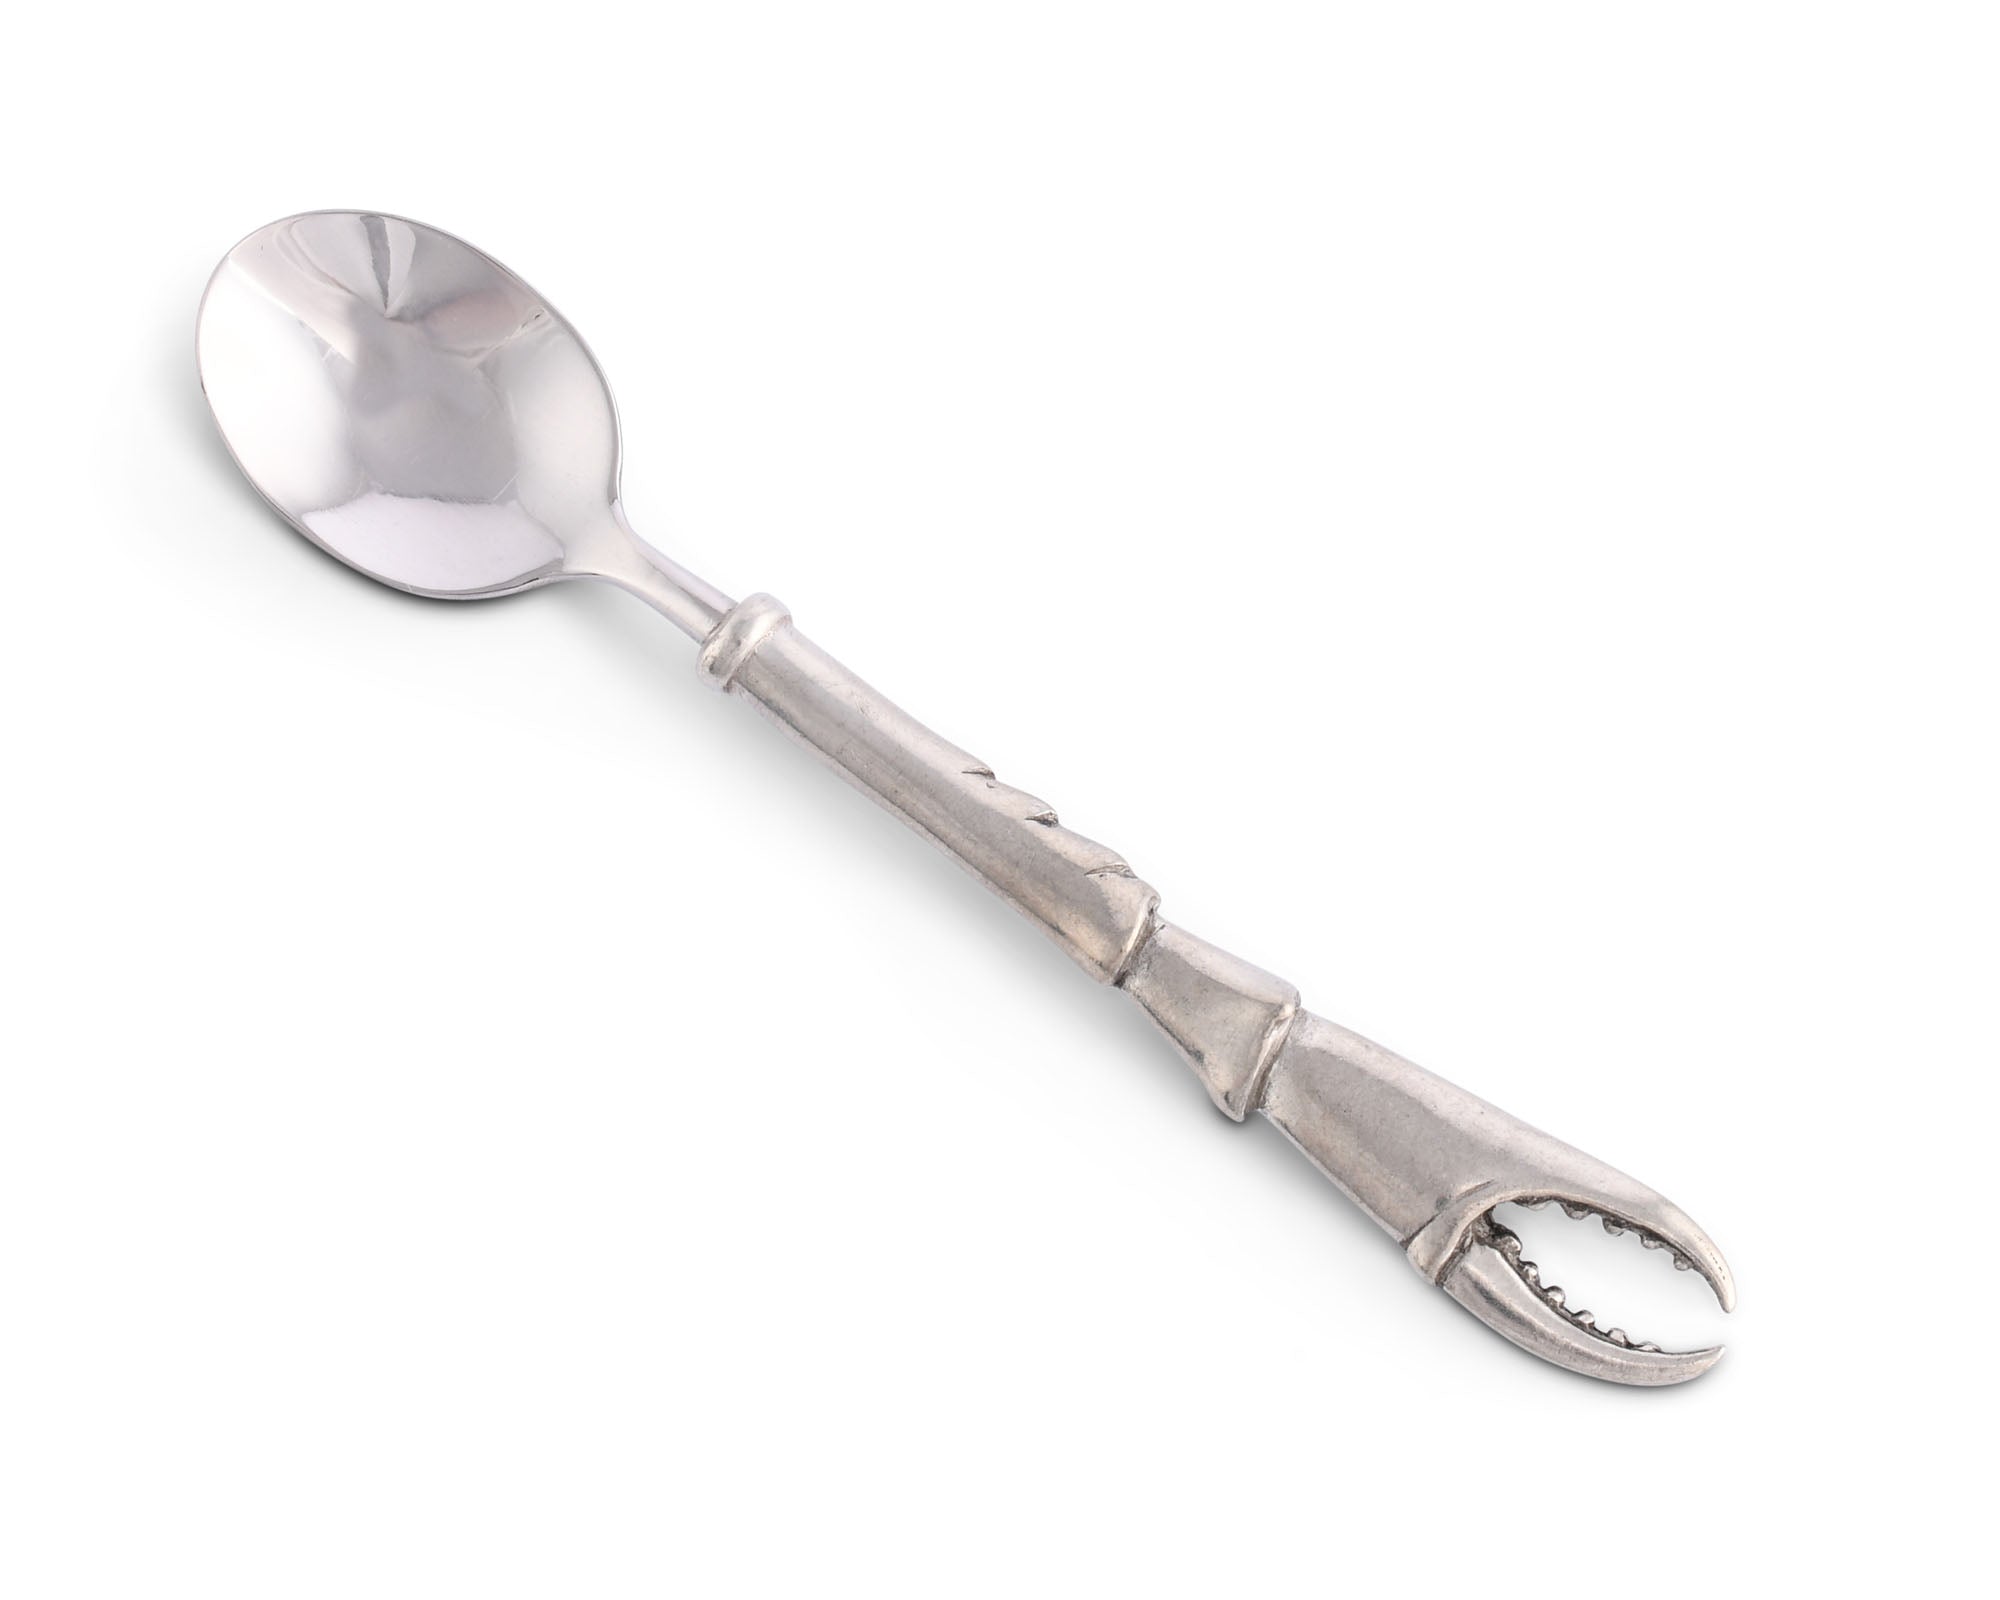 Vagabond House Crab Claw Serving Spoon Product Image